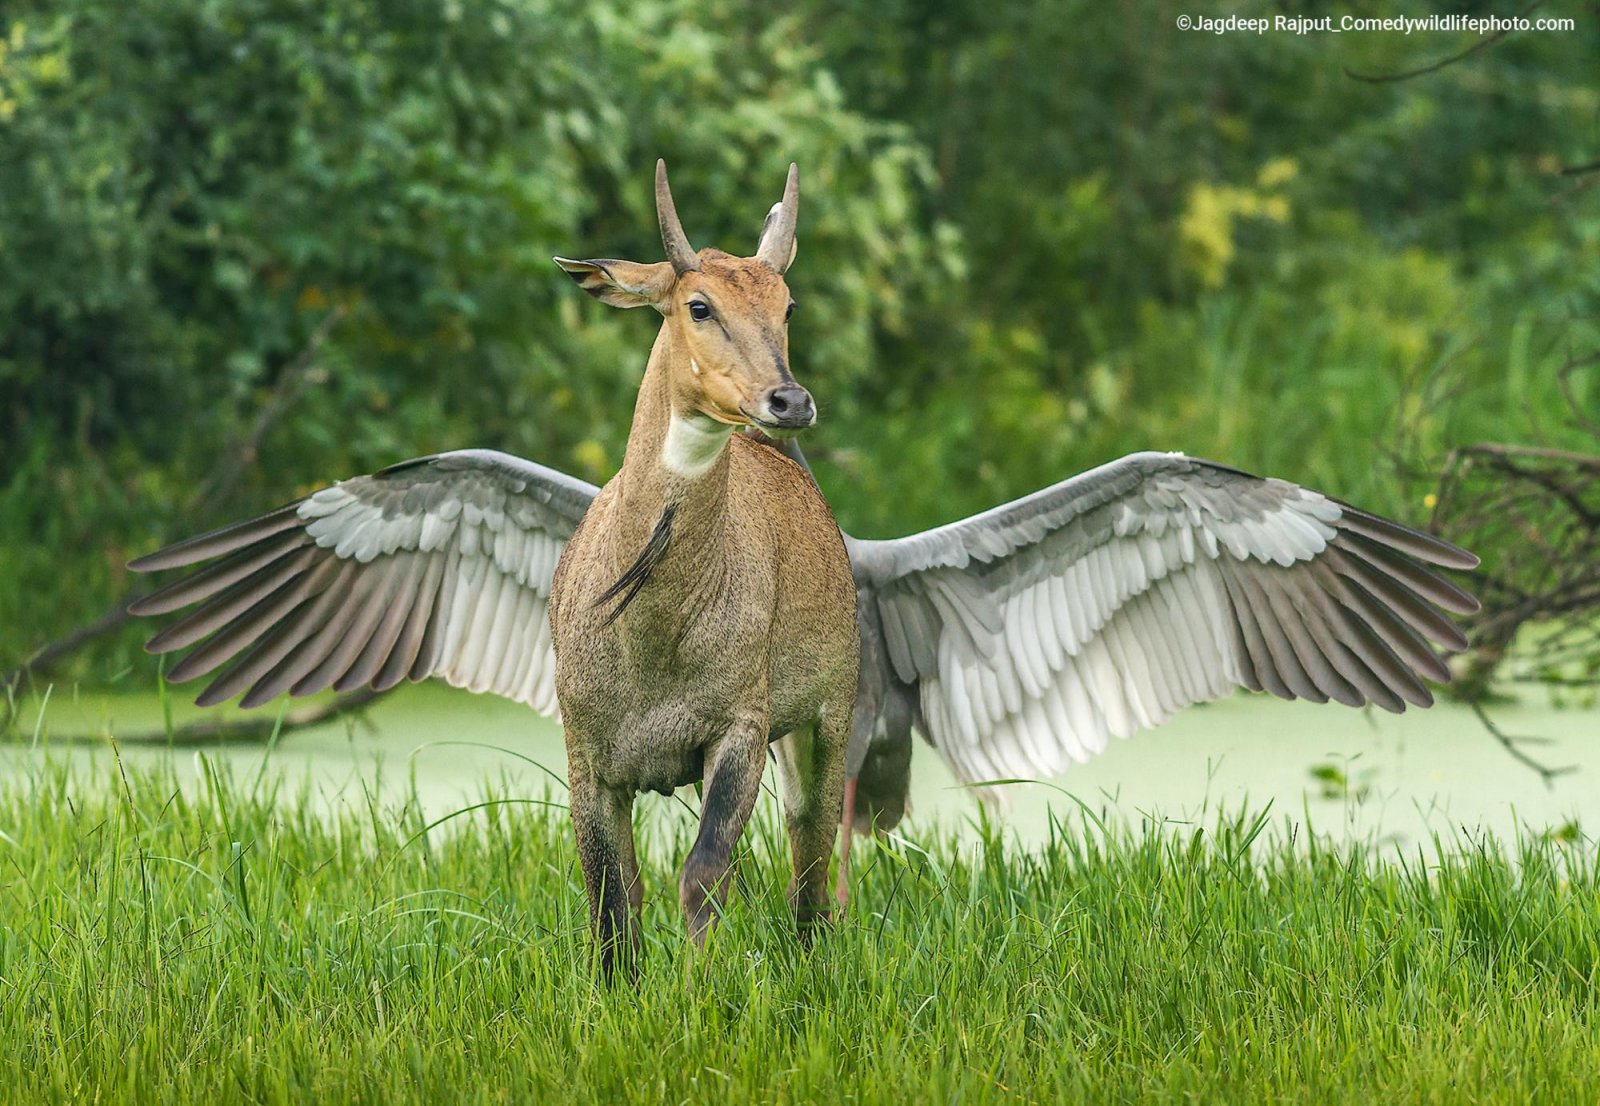 A Crane stands behind a bull in a green meadow with its wings outstretched. Gives the appearance the bull has wings